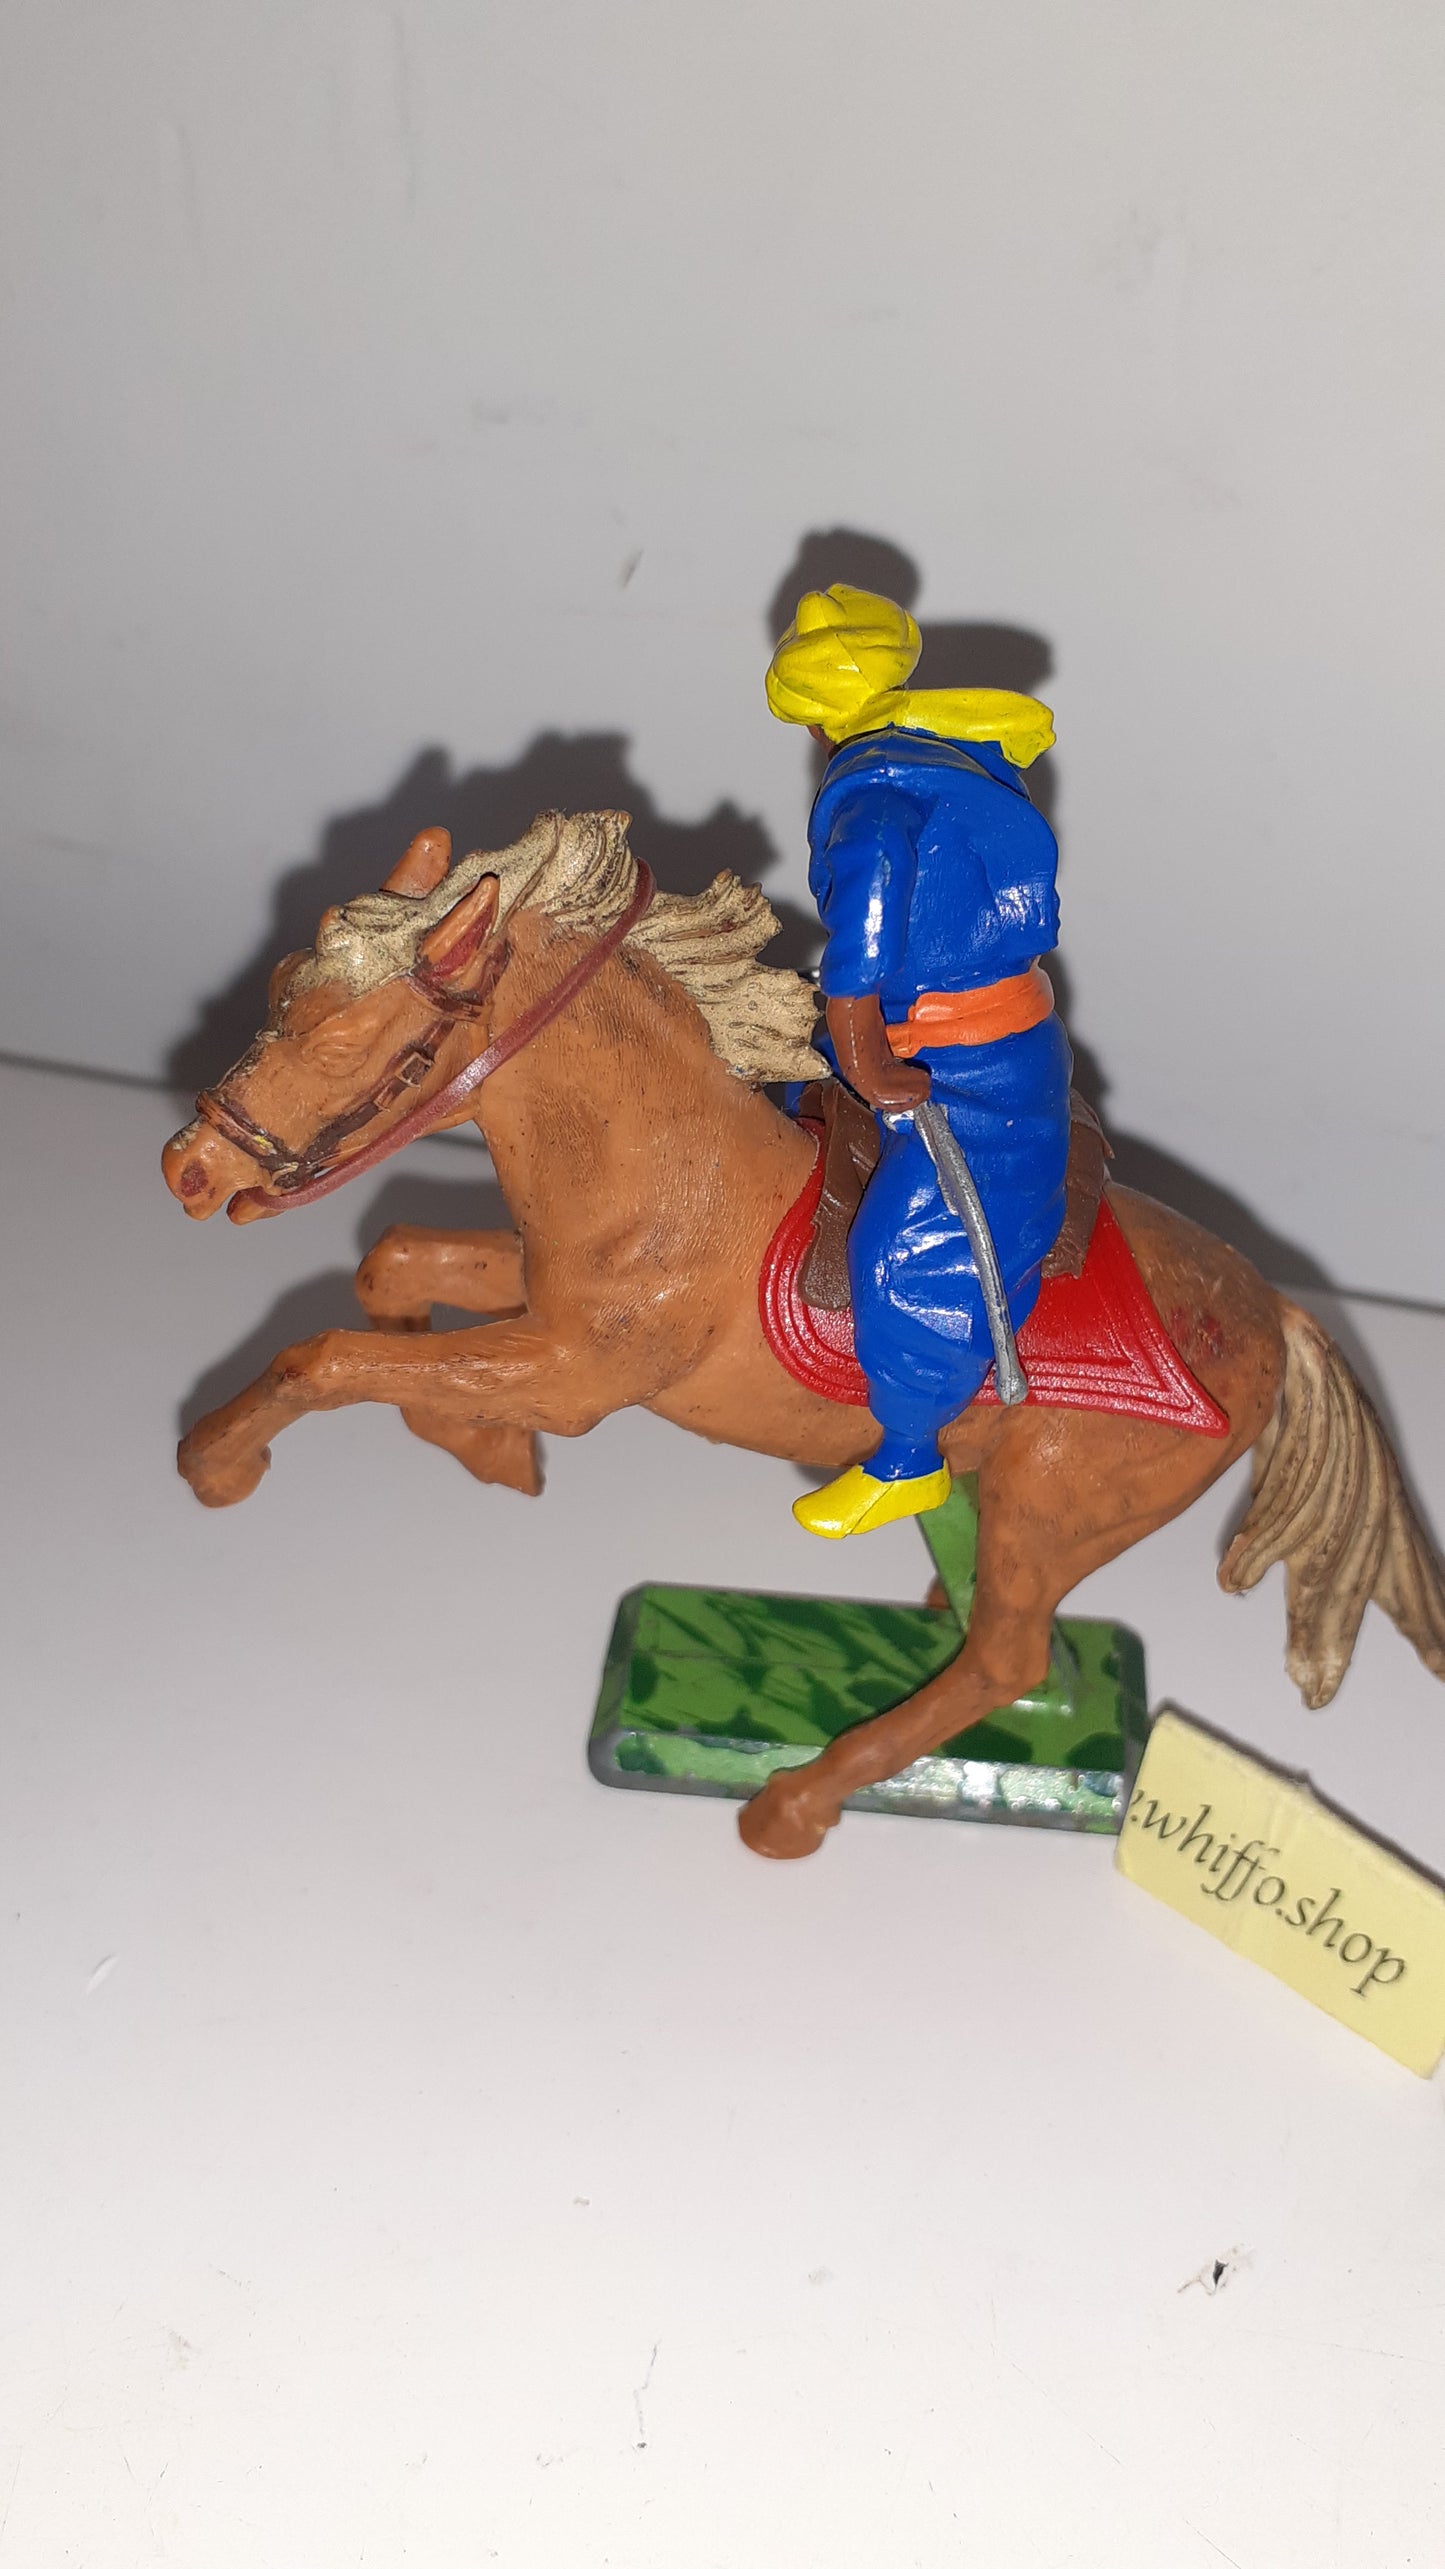 Britains deetail mounted arabs cavalry 1970s Made England Set of 3 1:32 B2